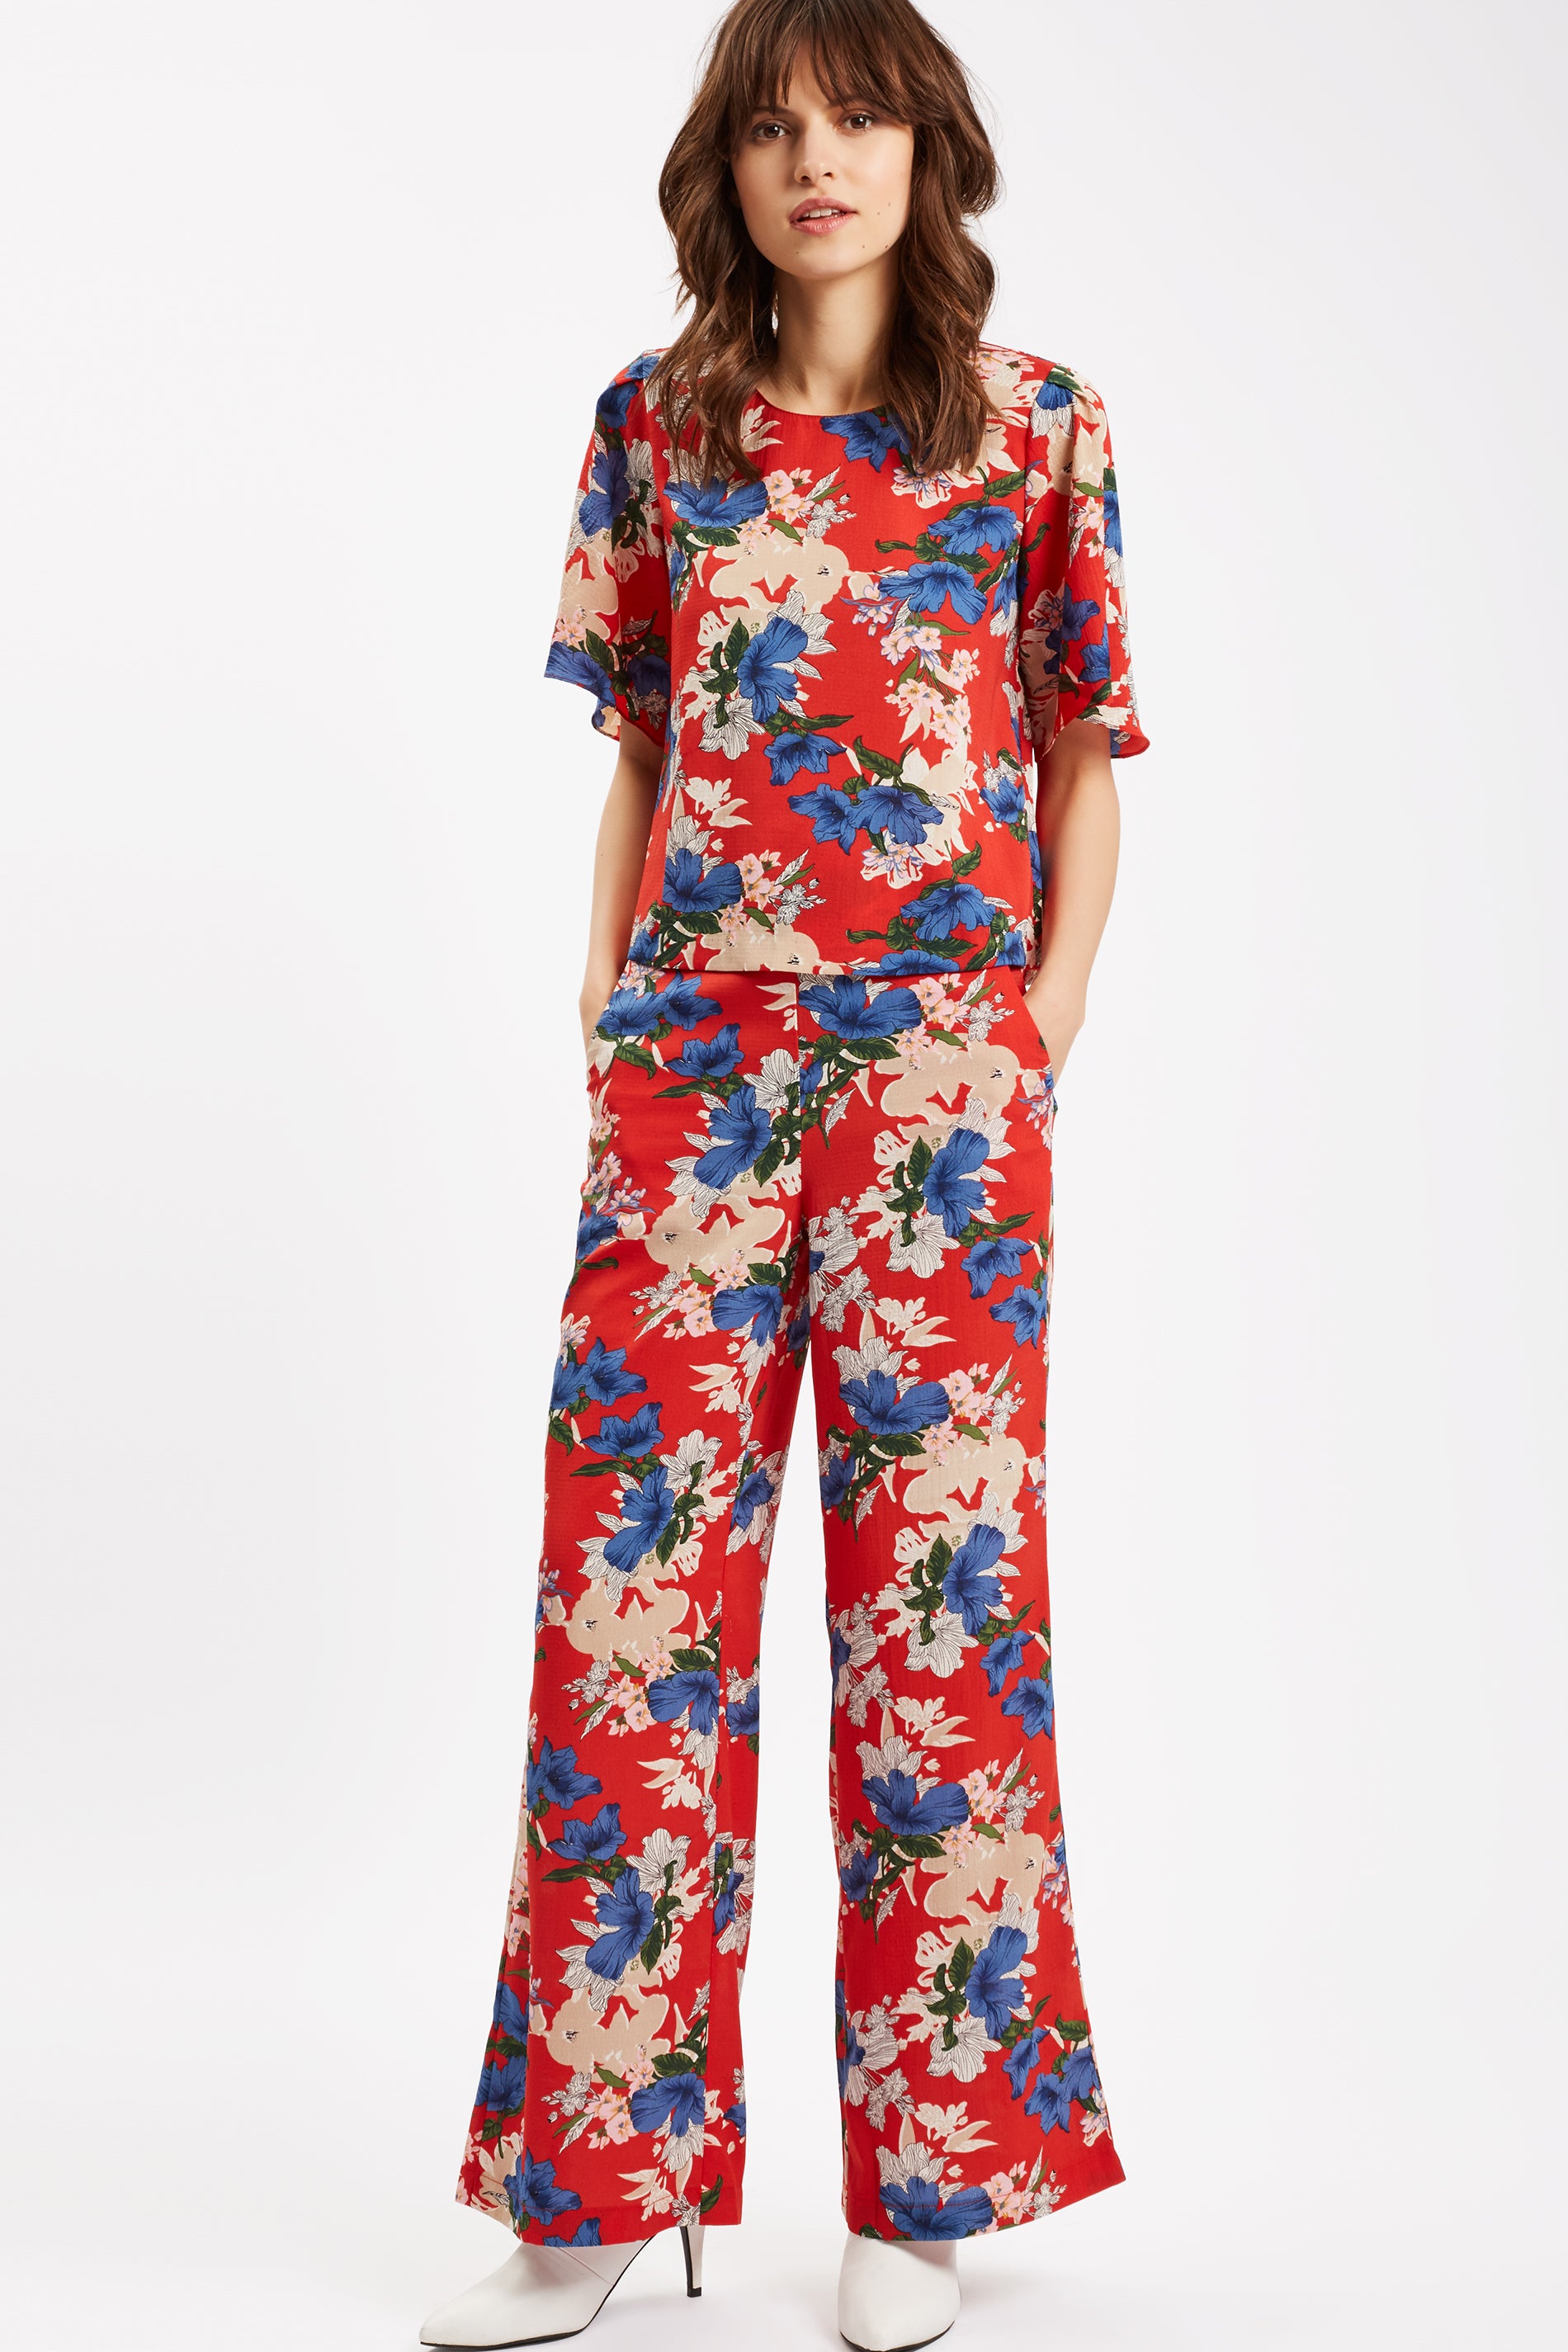 SING Floral Red Wide Leg Trousers